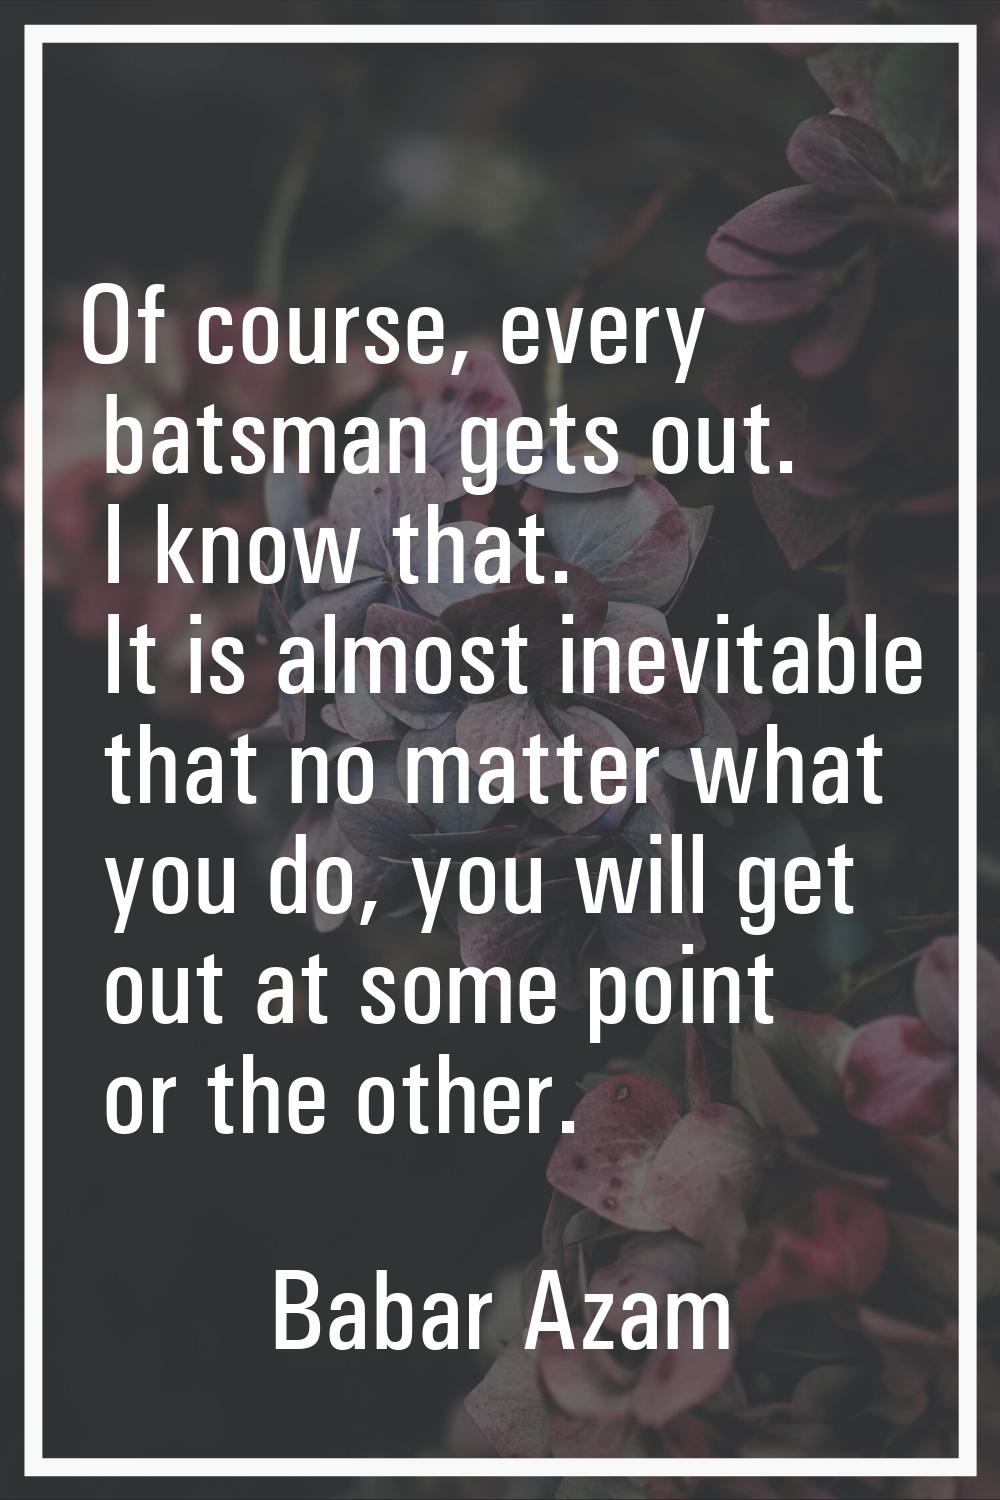 Of course, every batsman gets out. I know that. It is almost inevitable that no matter what you do,